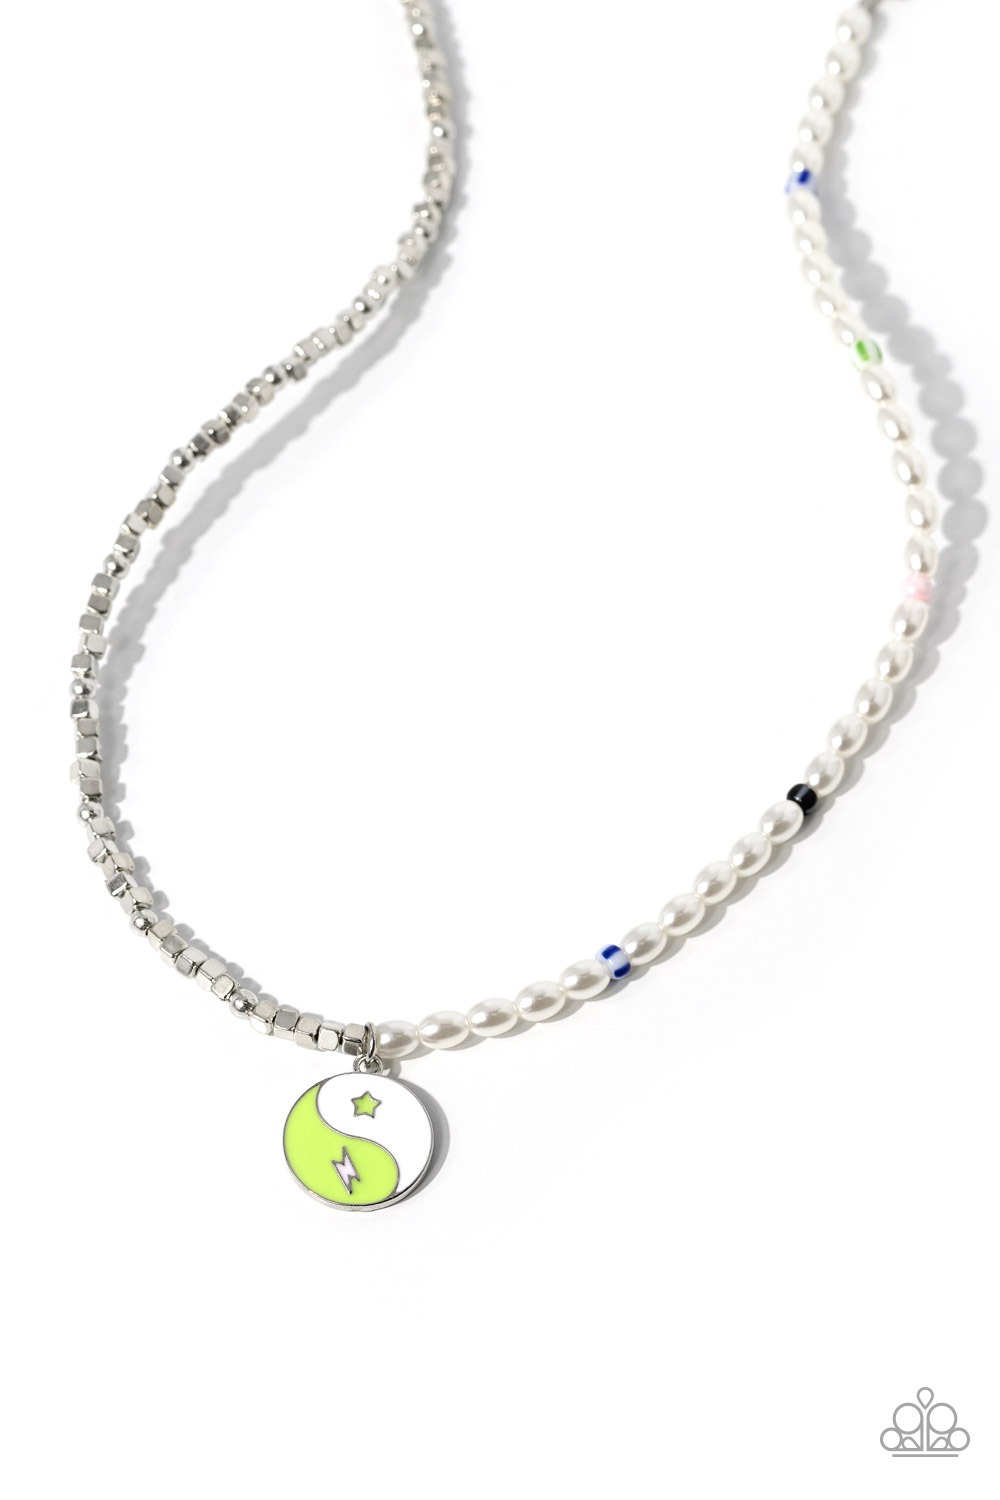 Necklace - Youthful Yin and Yang - Green